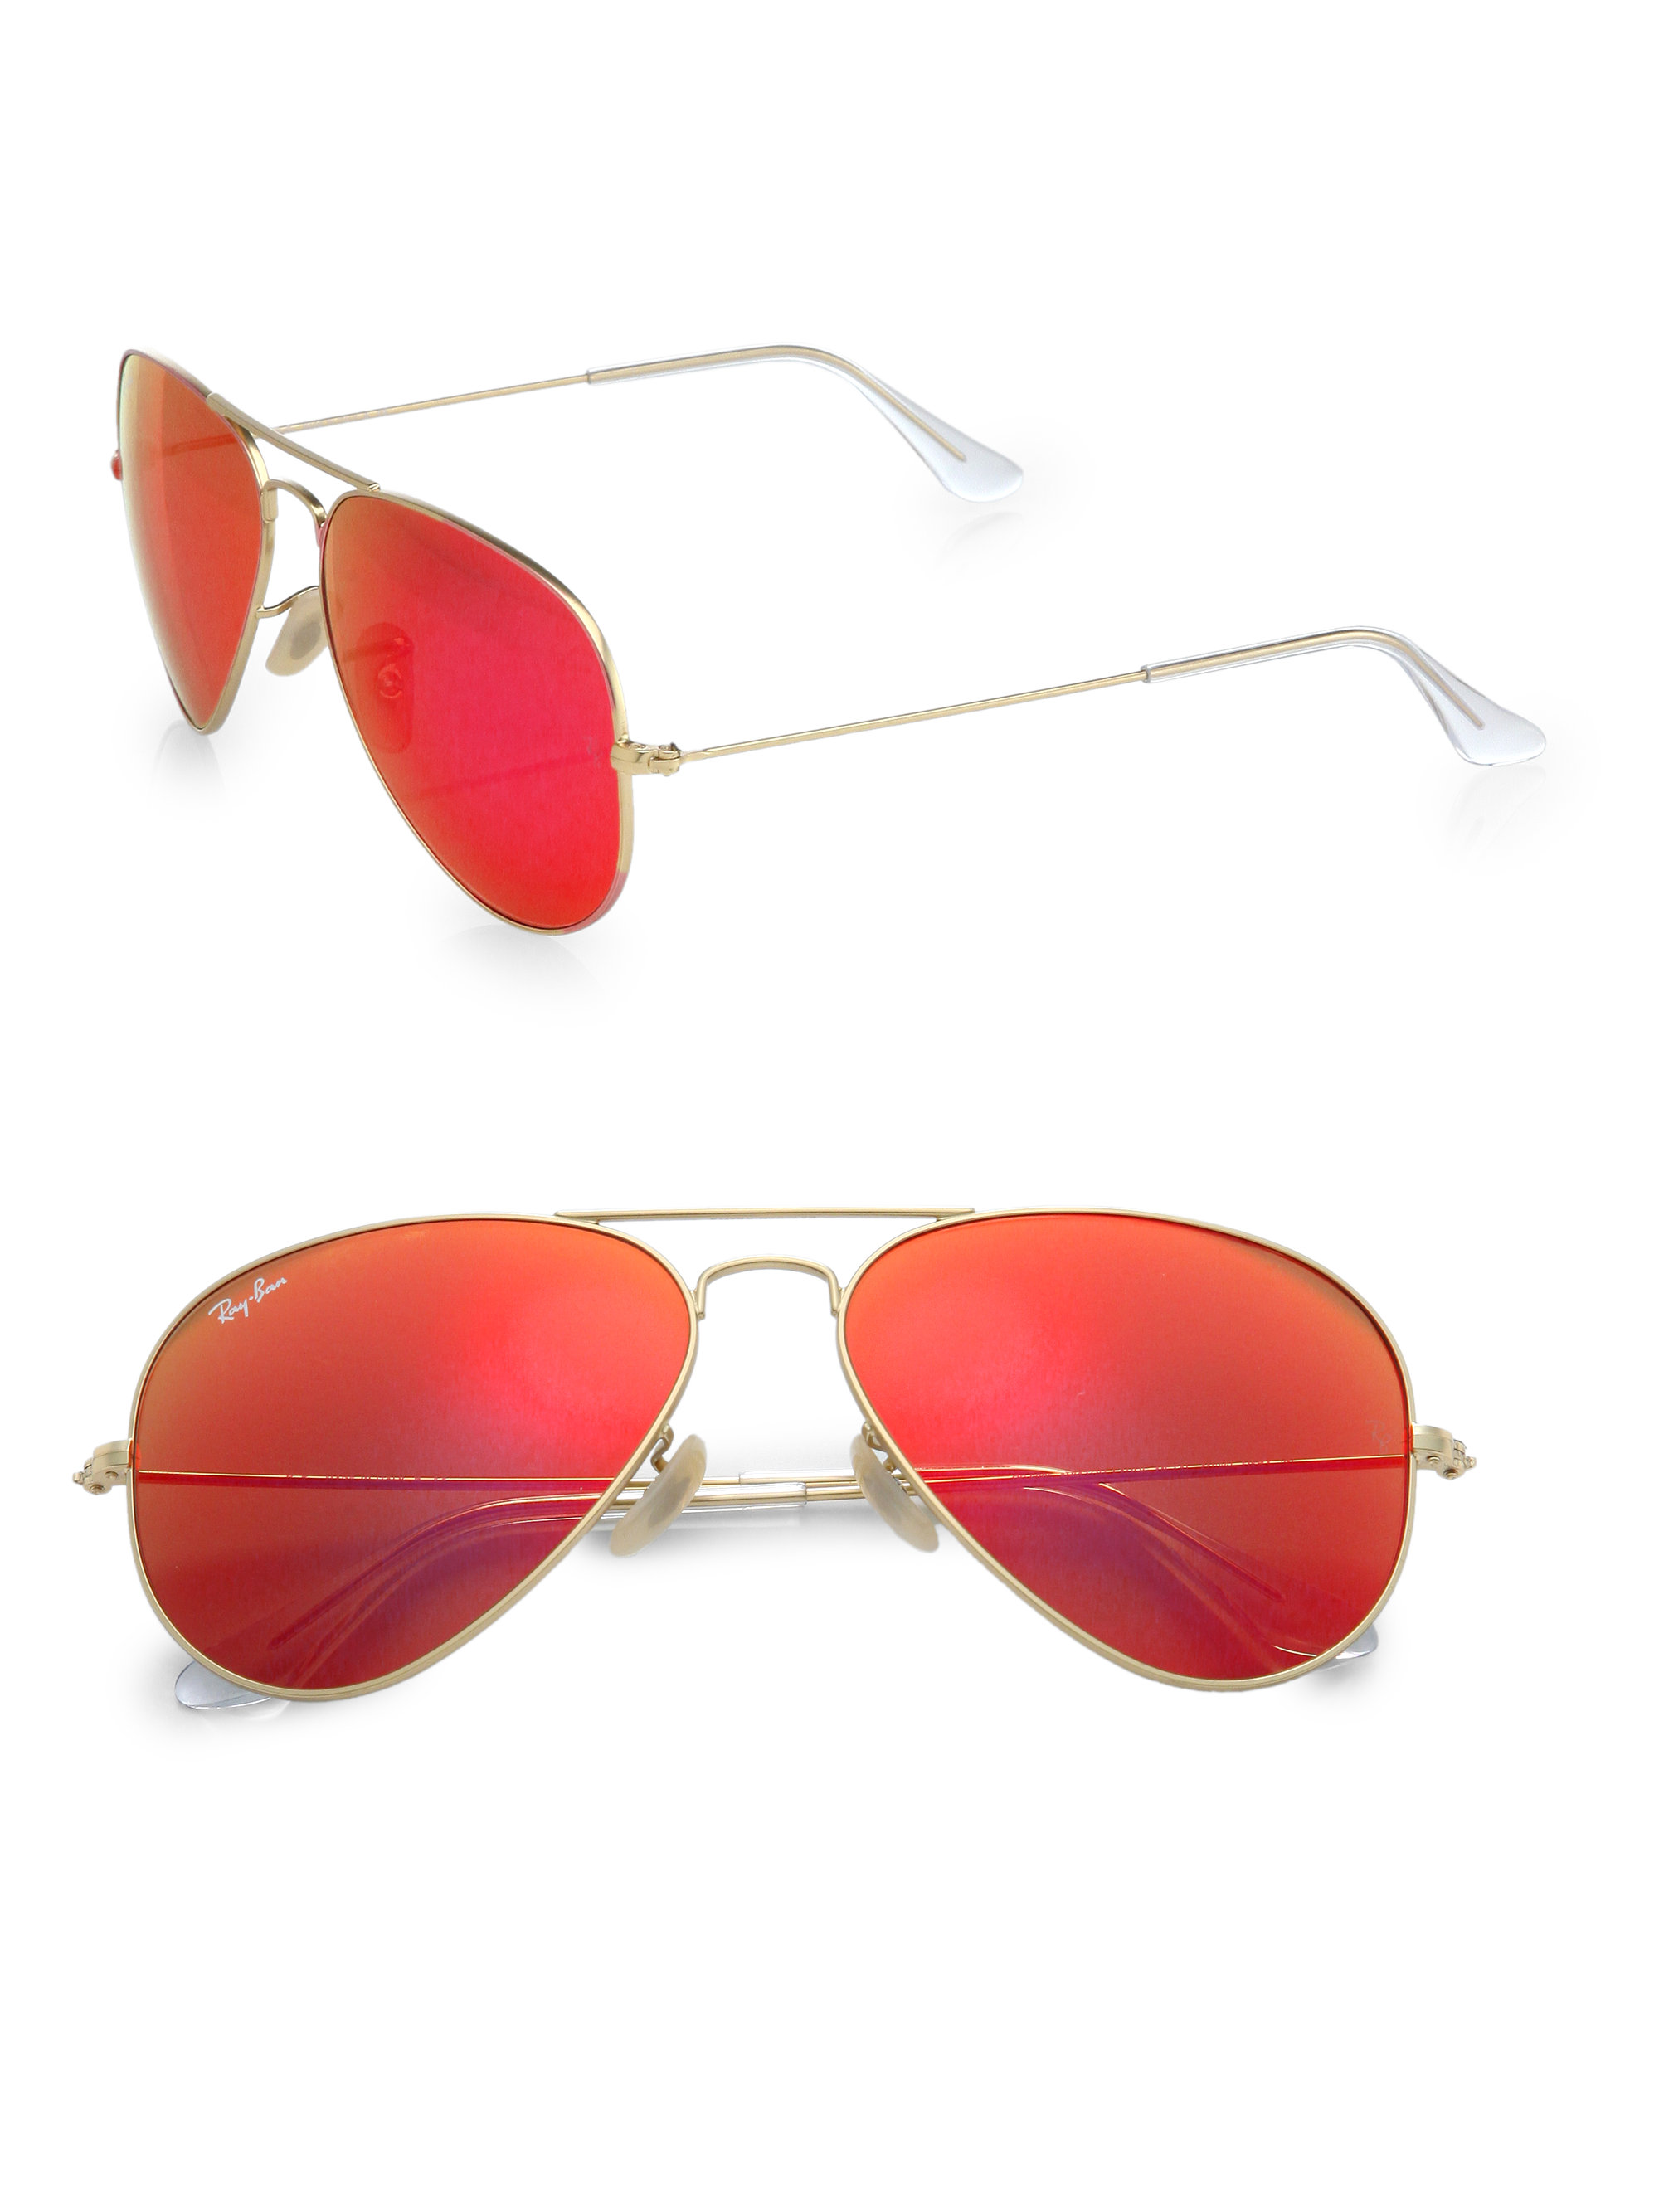 Ray-ban Classic Aviator Sunglasses in Red | Lyst